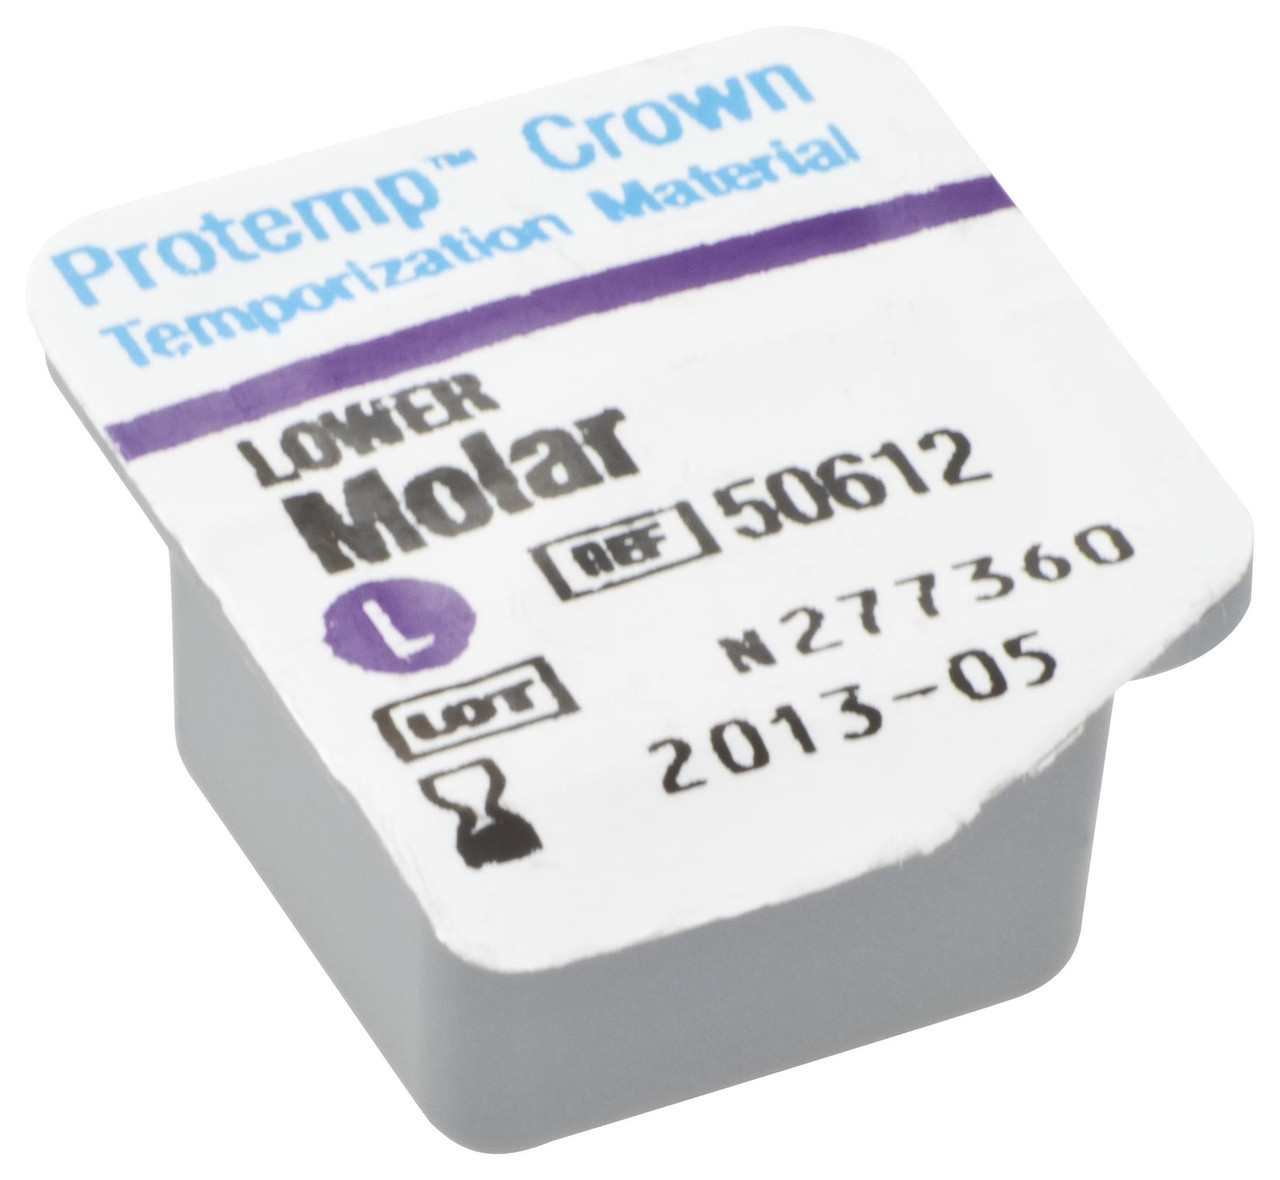 3M Protemp Crown Temporization Material, 50612, Molar Lower, Large, 5Crowns